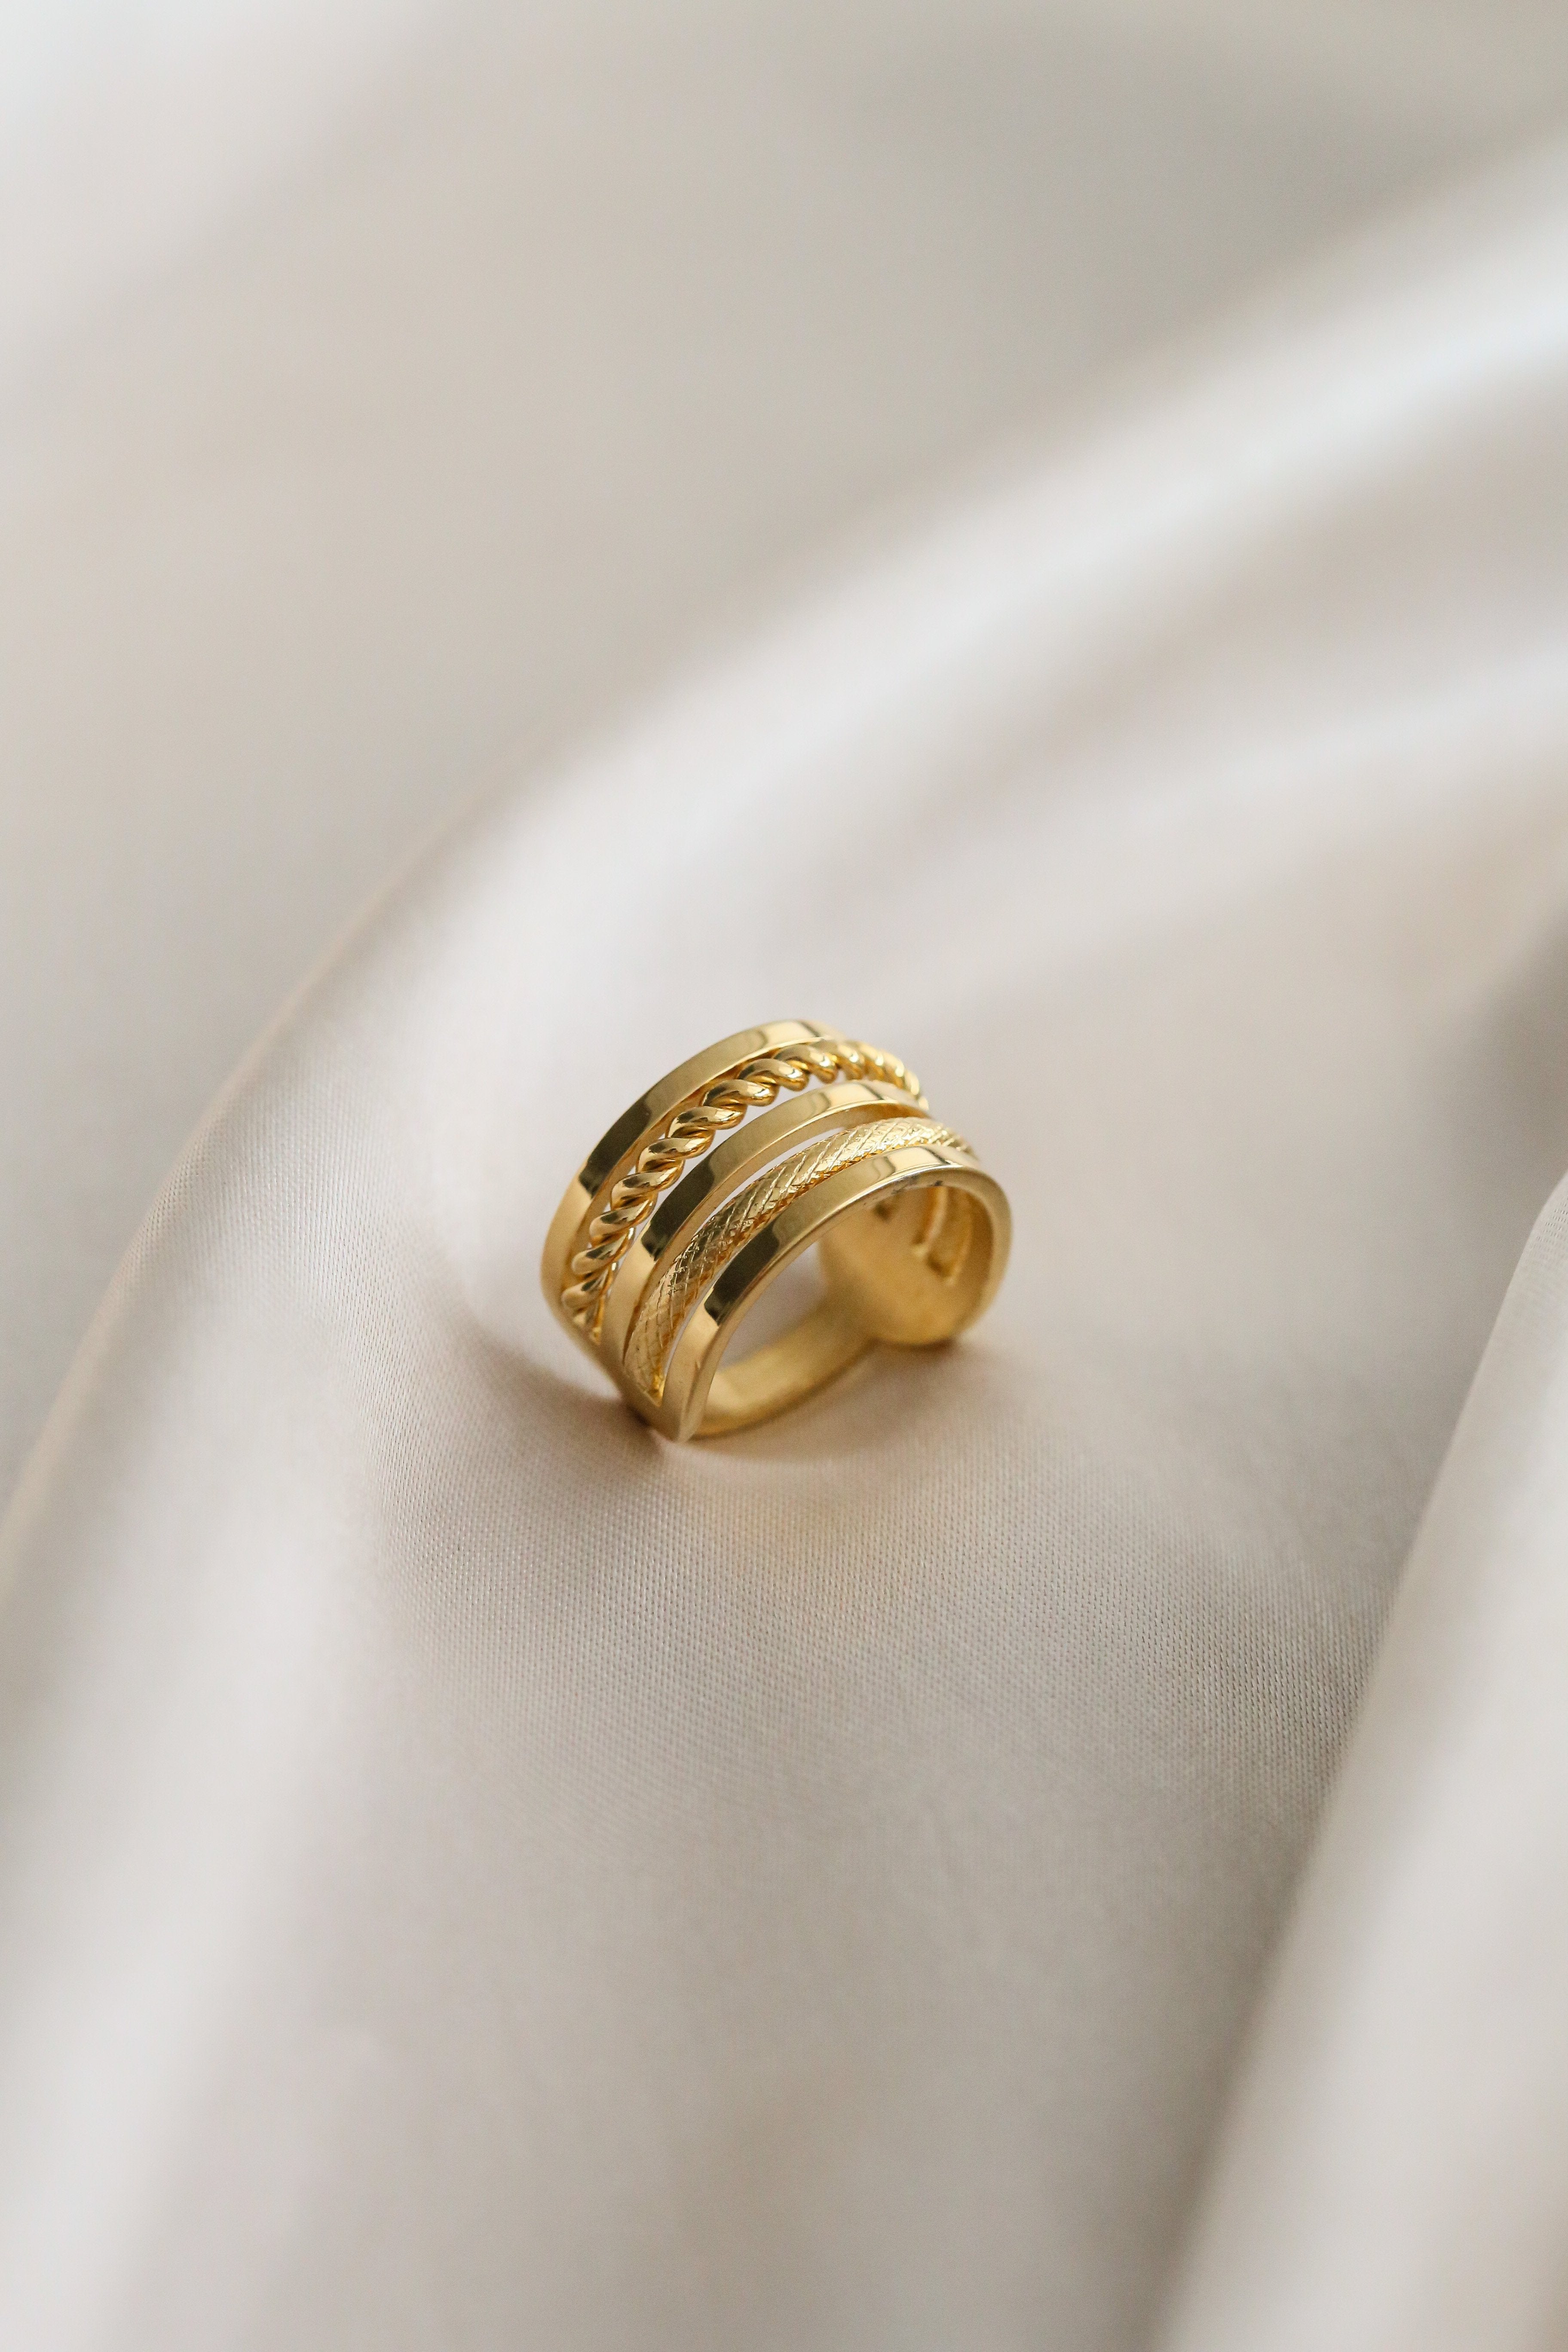 Annalise Ring - Boutique Minimaliste has waterproof, durable, elegant and vintage inspired jewelry